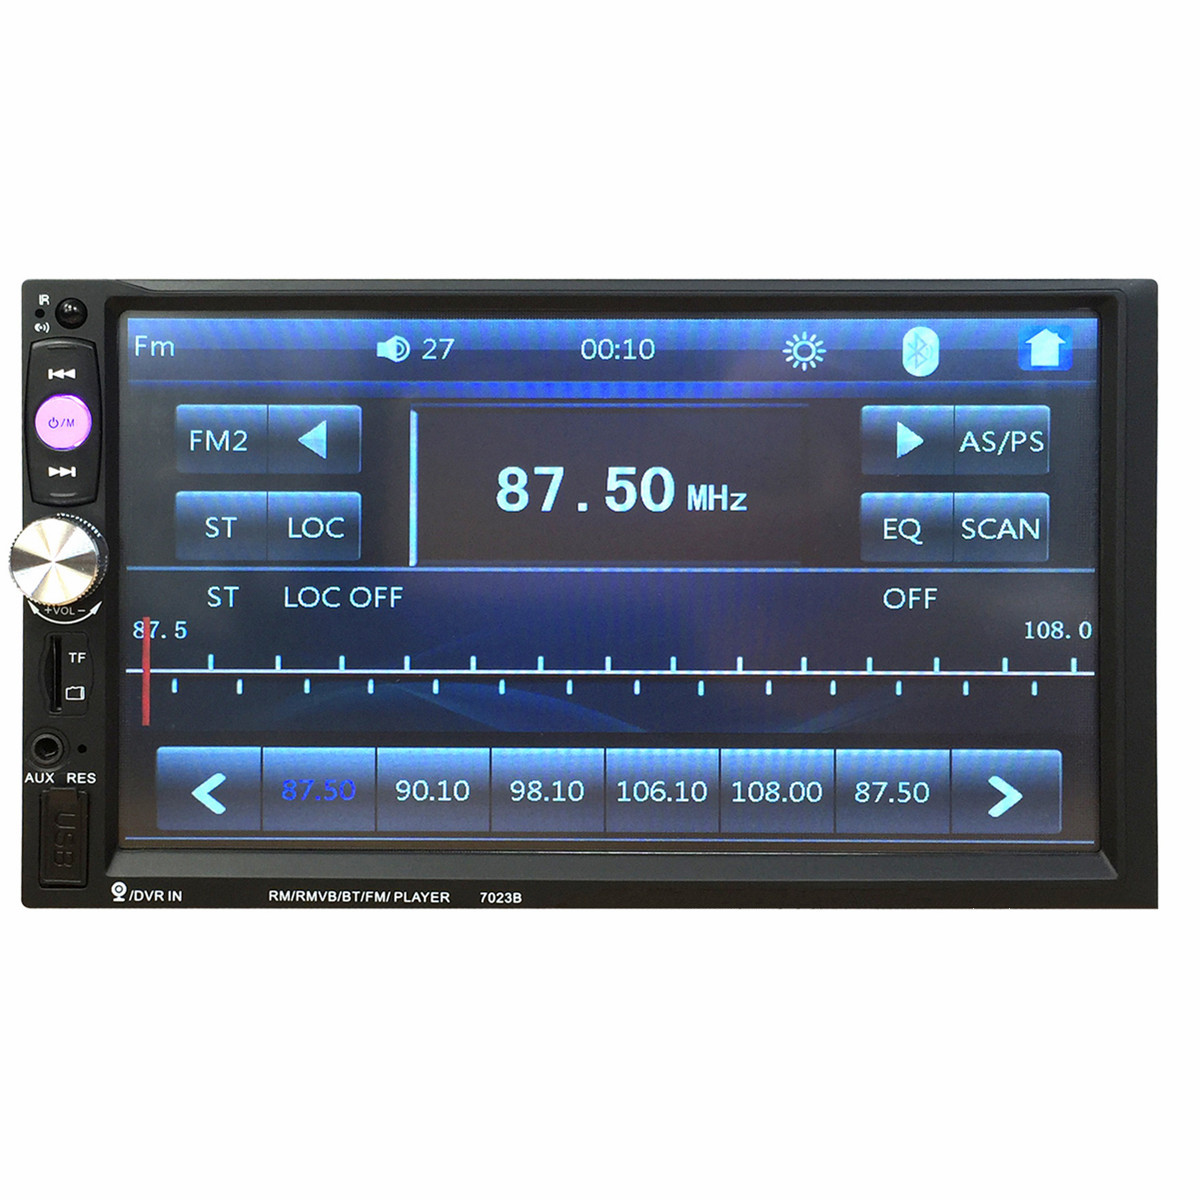 Imars 7023B 7 Inch 2 DIN Car MP5 Player Stereo Radio FM USB AUX HD Bluetooth Touch Screen Support Rear Camera - Auto GoShop